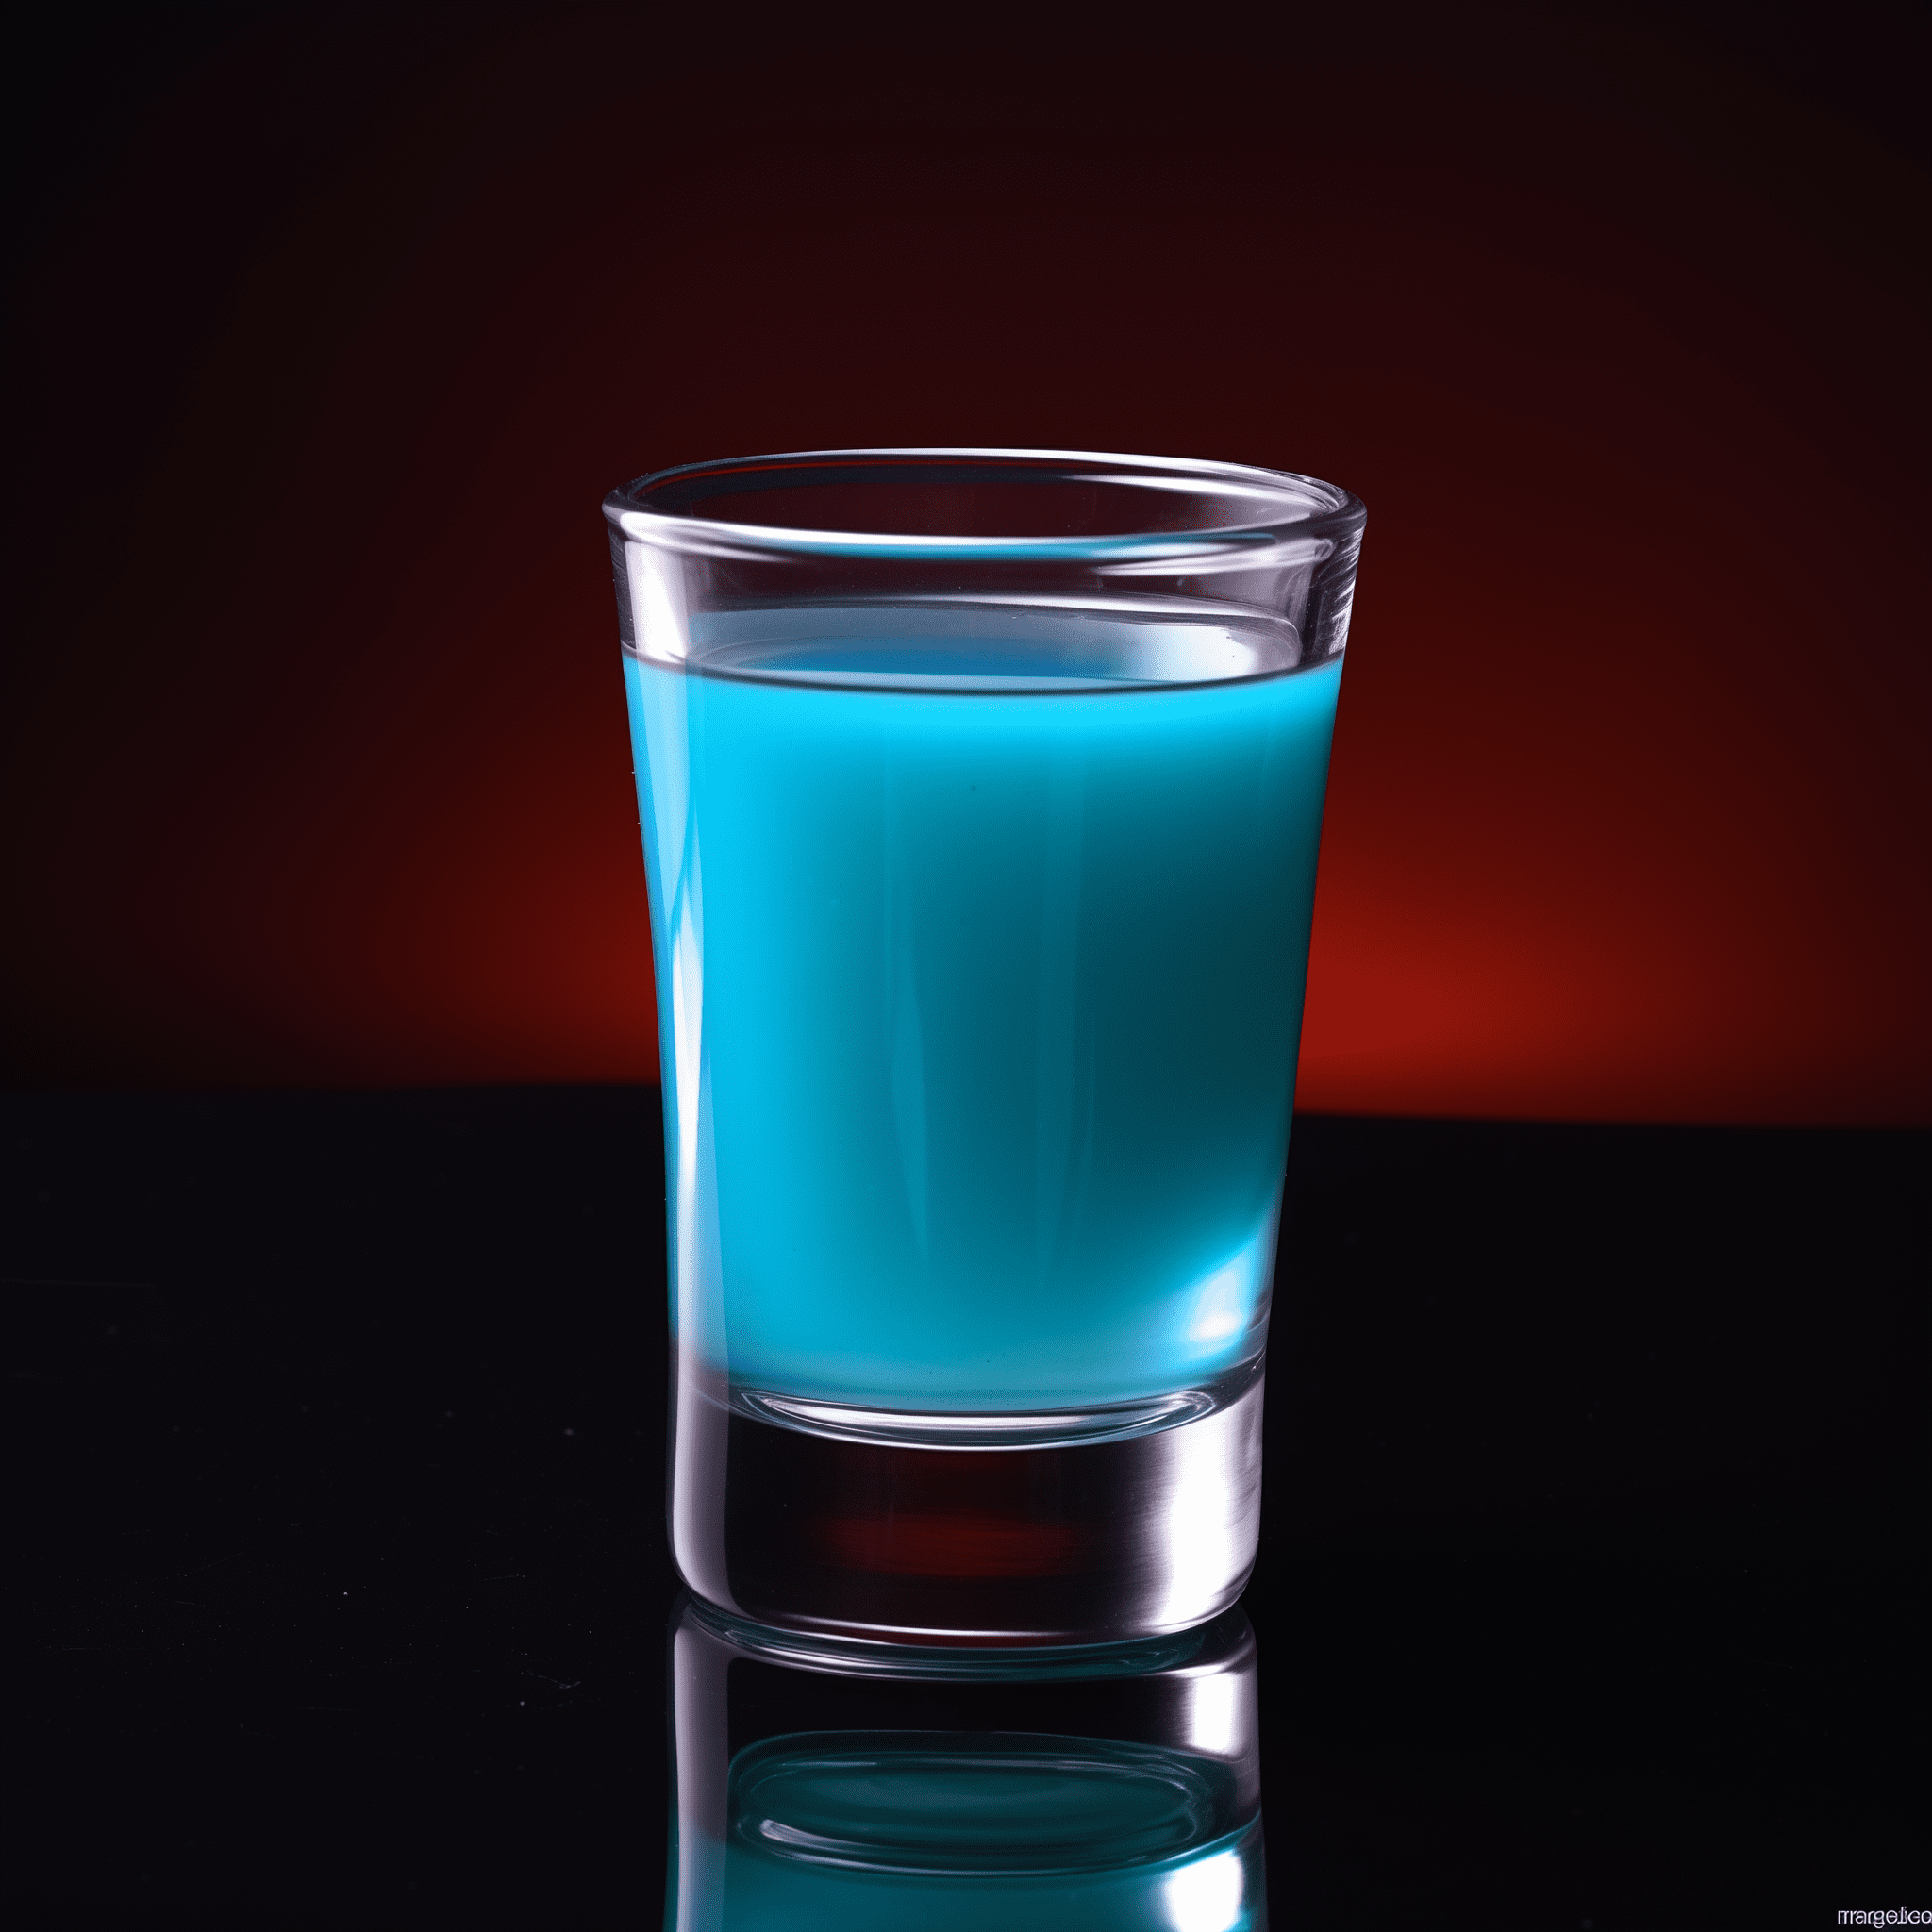 Blue Moon Shot Recipe - The Blue Moon Shot offers a delightful blend of sweet almond flavor from the Amaretto, complemented by the slightly bitter and citrus notes of the Blue Curaçao. It's a smooth, rich shot with a creamy texture that can be both refreshing and indulgent.